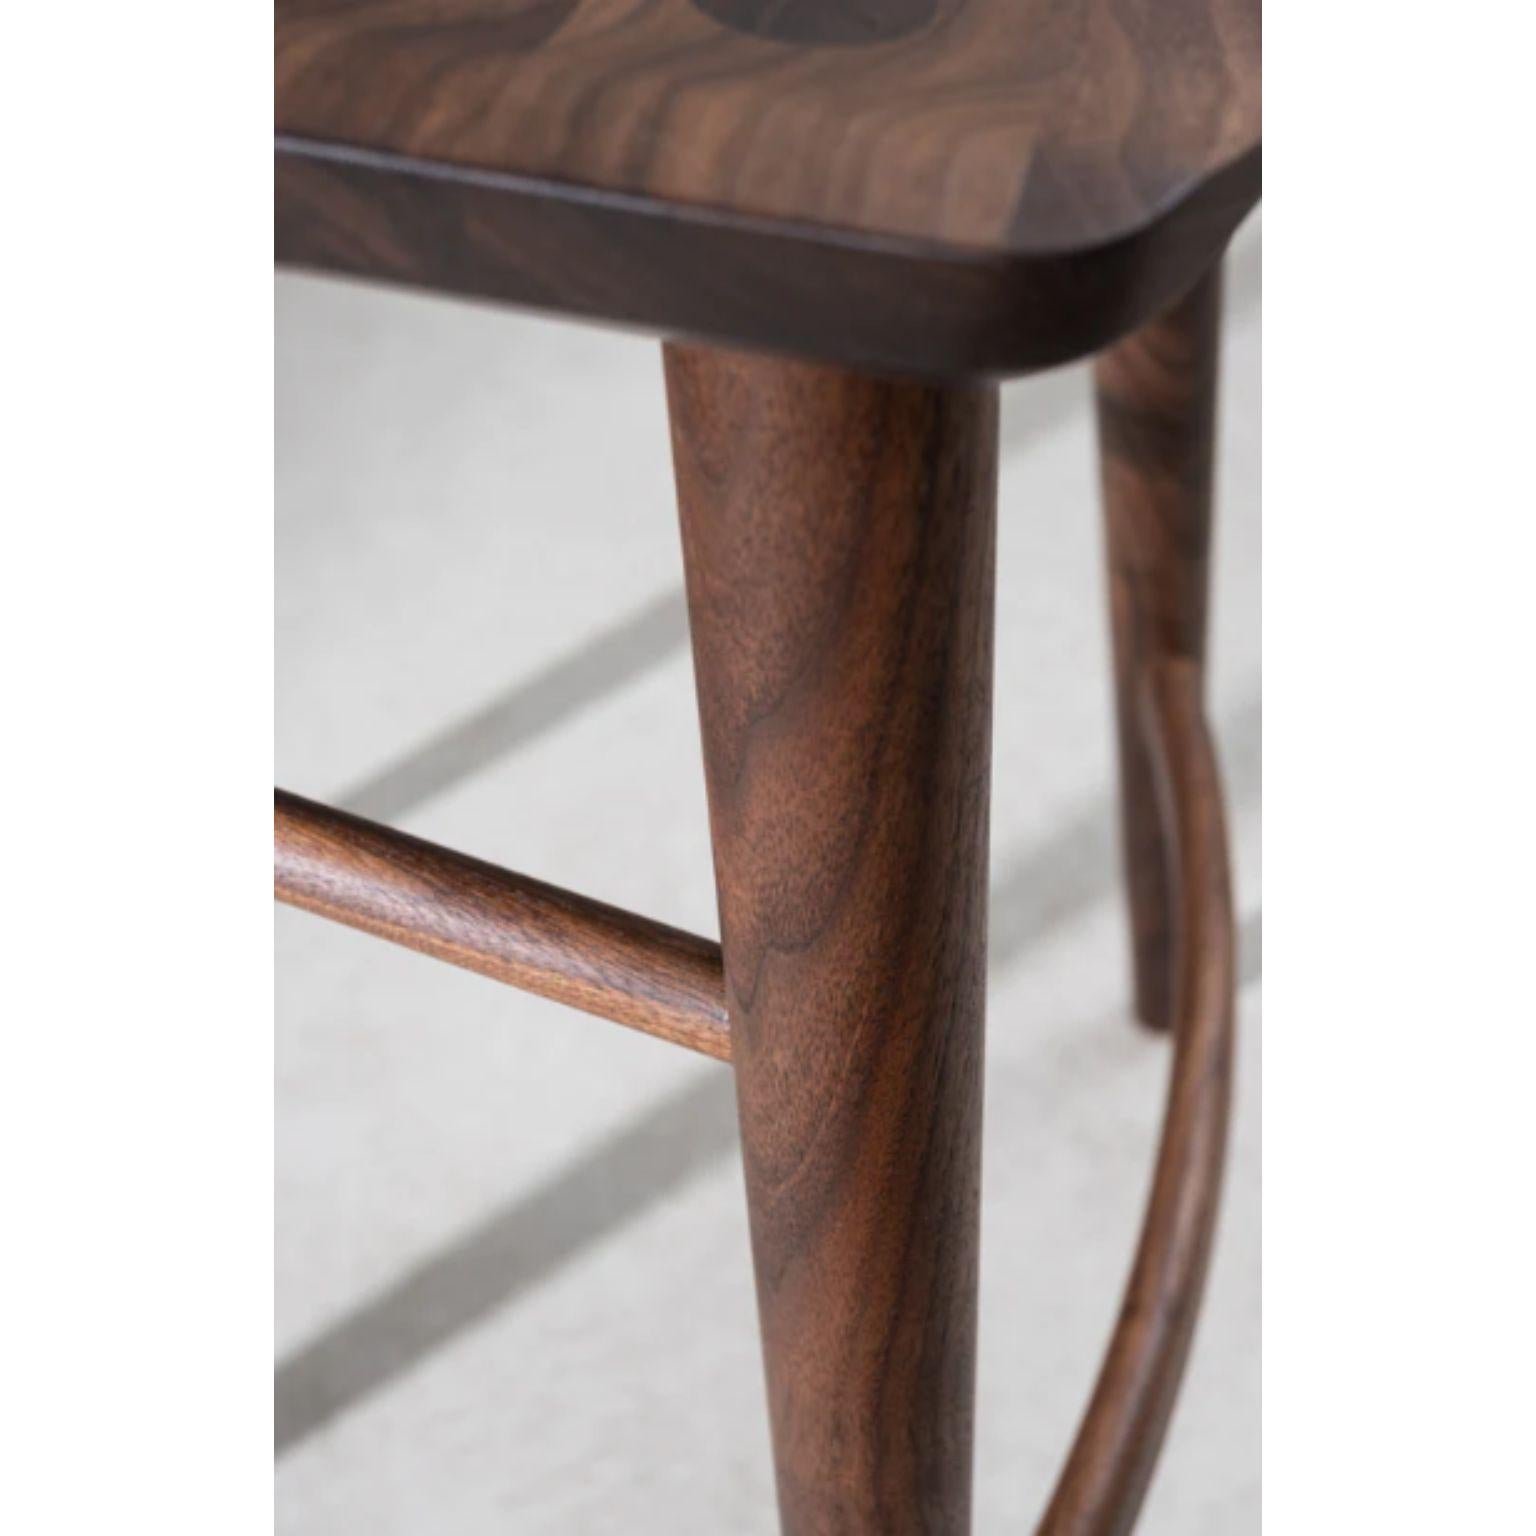 Other Walnut Oxbend Stool by Fernweh Woodworking